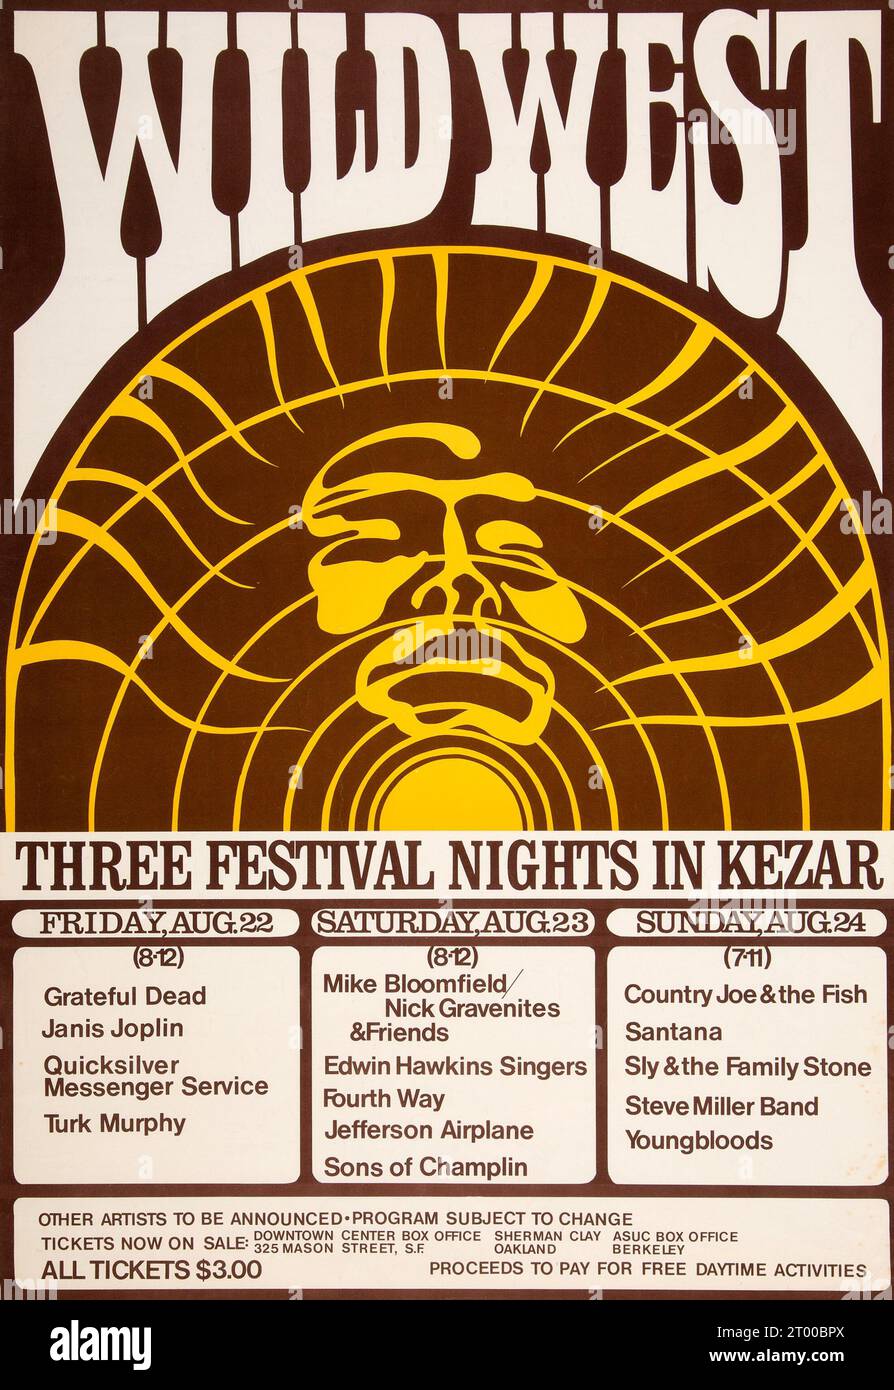 Grateful Dead, Janis Joplin 1969 'Wild West' Festival San Francisco - Vintage Concert Poster - feat Steve Miller, Jefferson Airplane, Sly & The Family Stone, Santana, Mike Bloomfield, Youngbloods, Quicksilver Messenger Service. August 22, 23, 24. Stock Photo